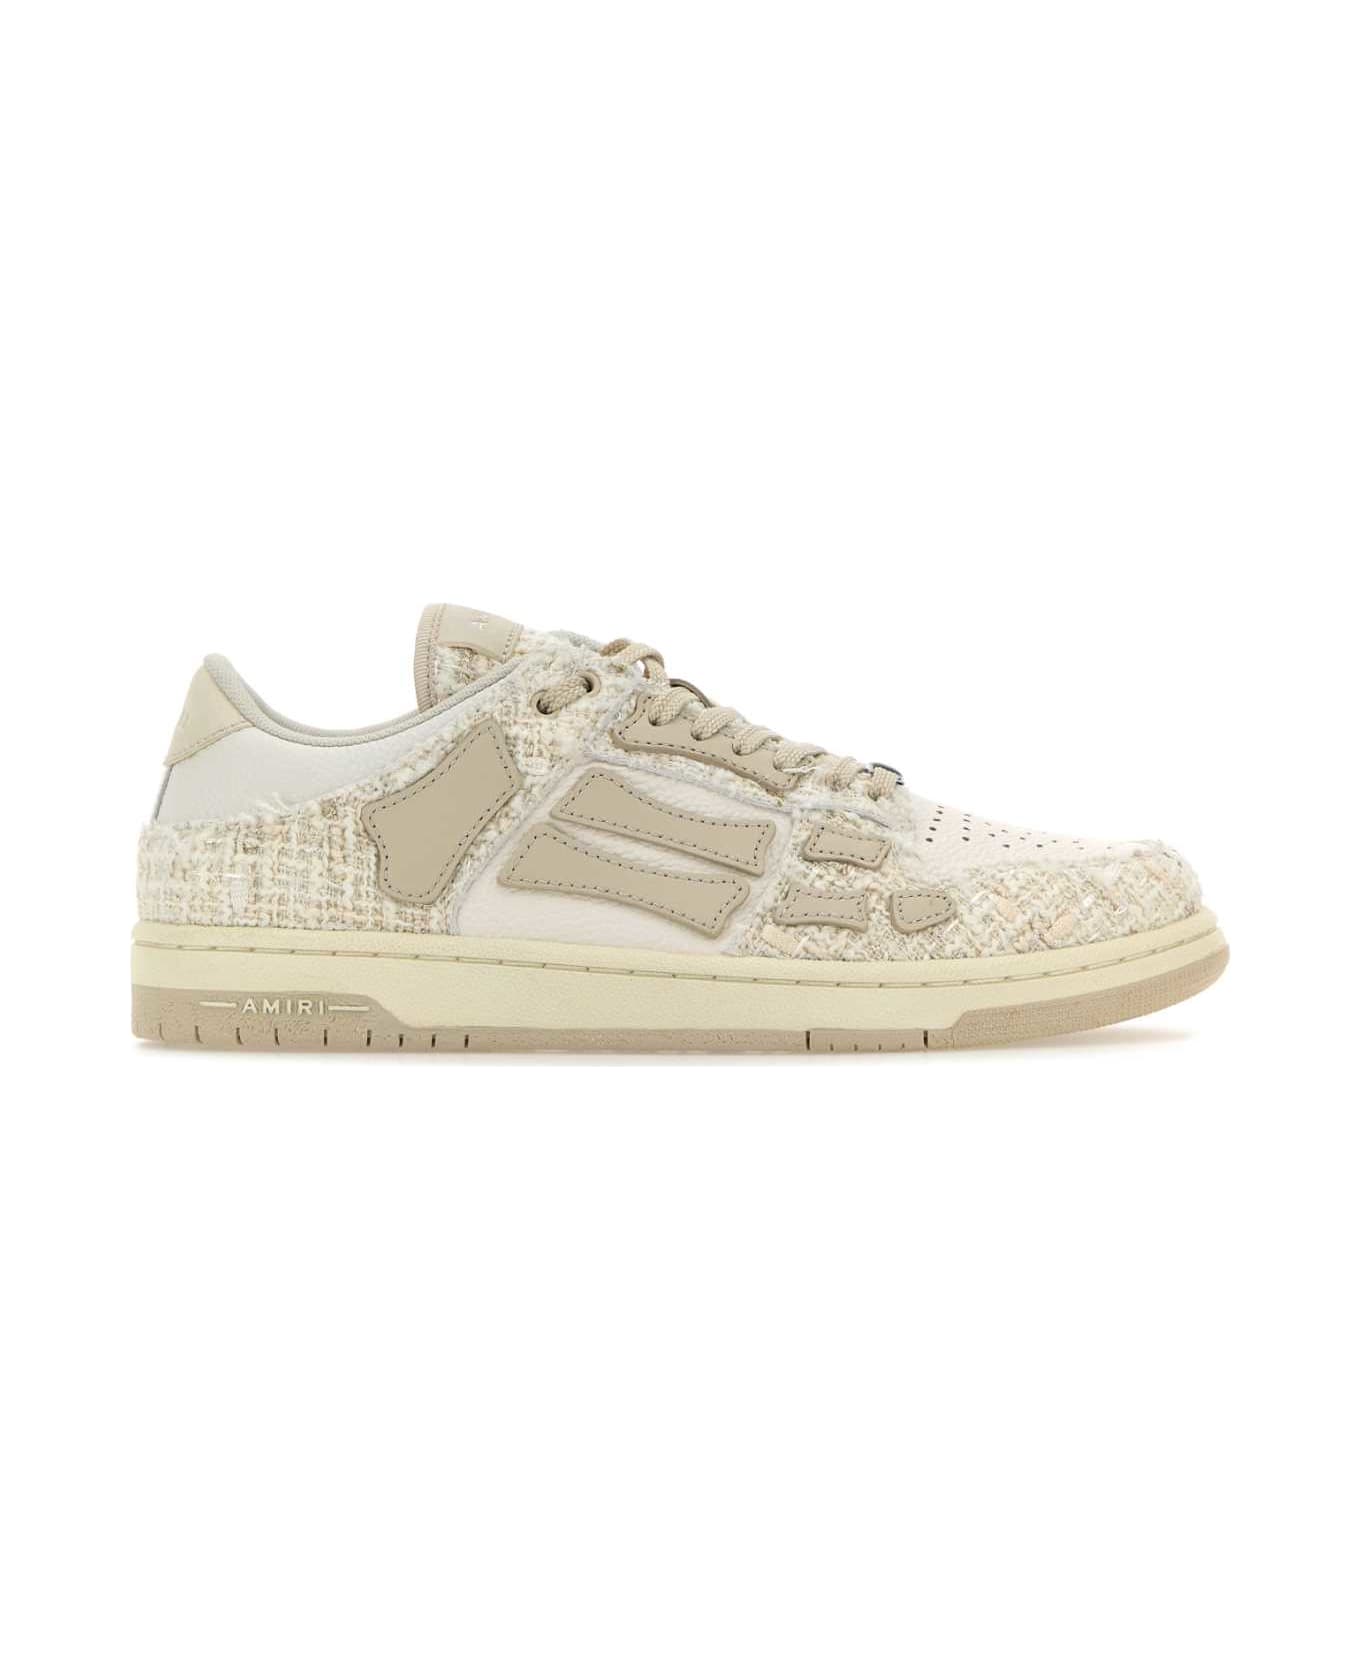 AMIRI Multicolor Leather And Fabric Skel Sneakers - ALABASTER